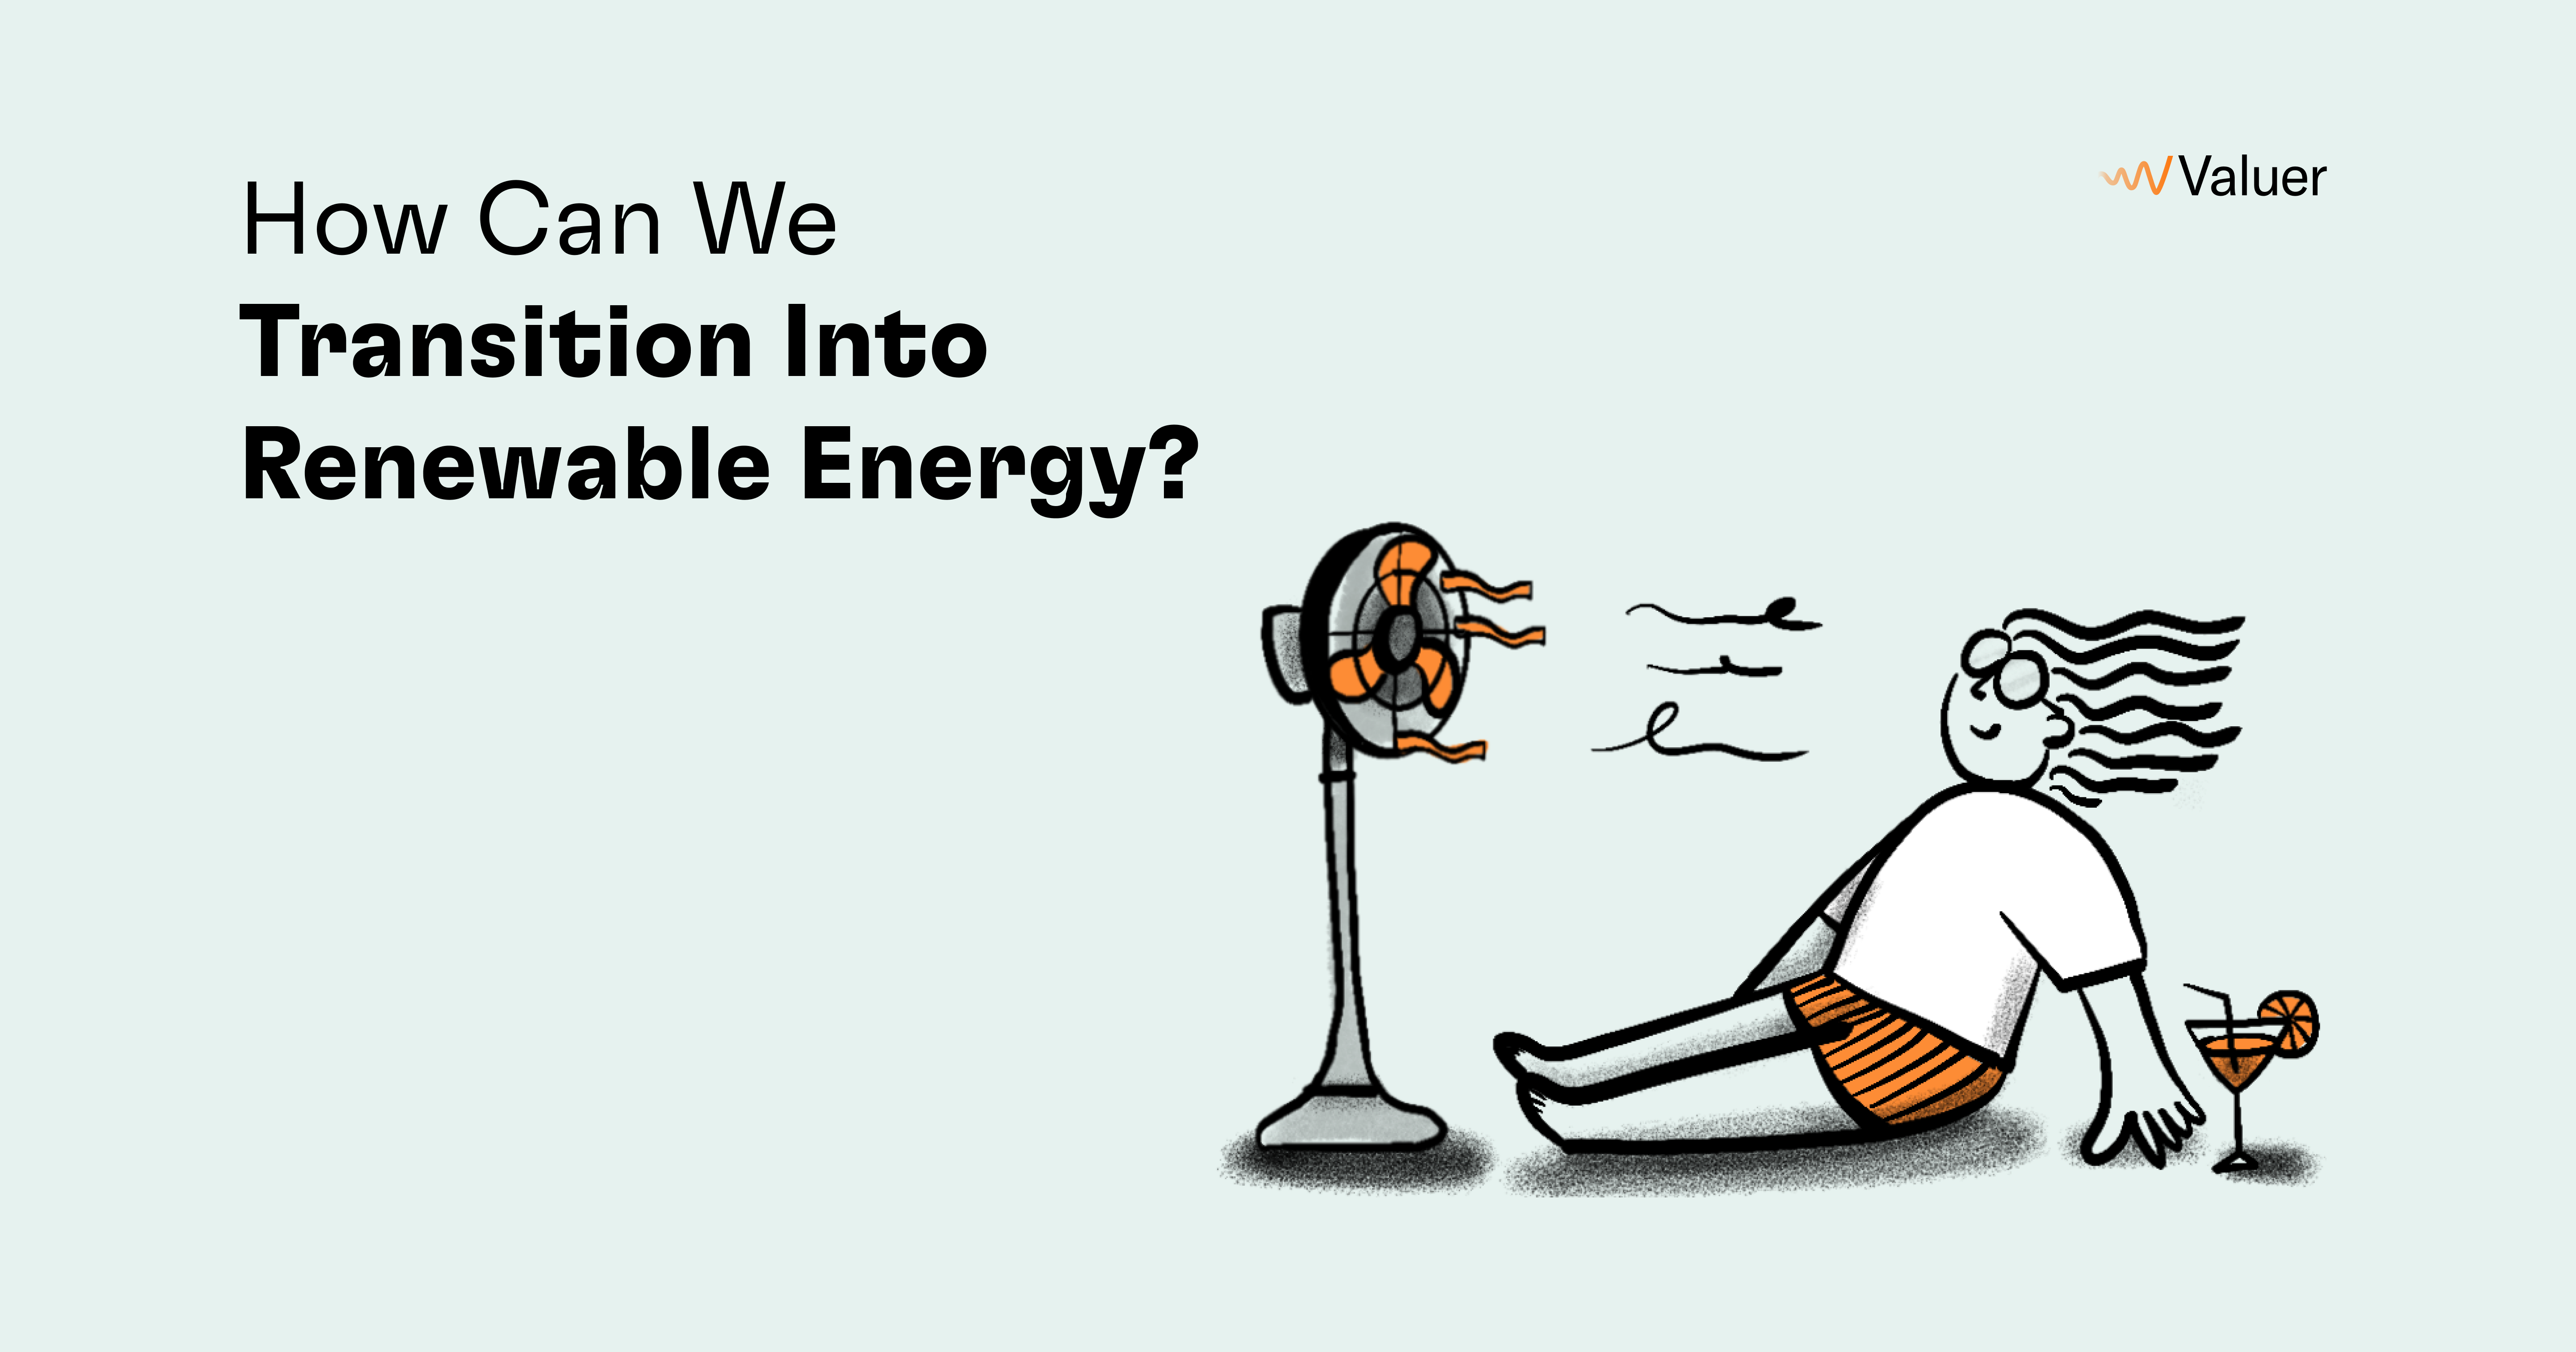 How Can We Transition Into Renewable Energy?